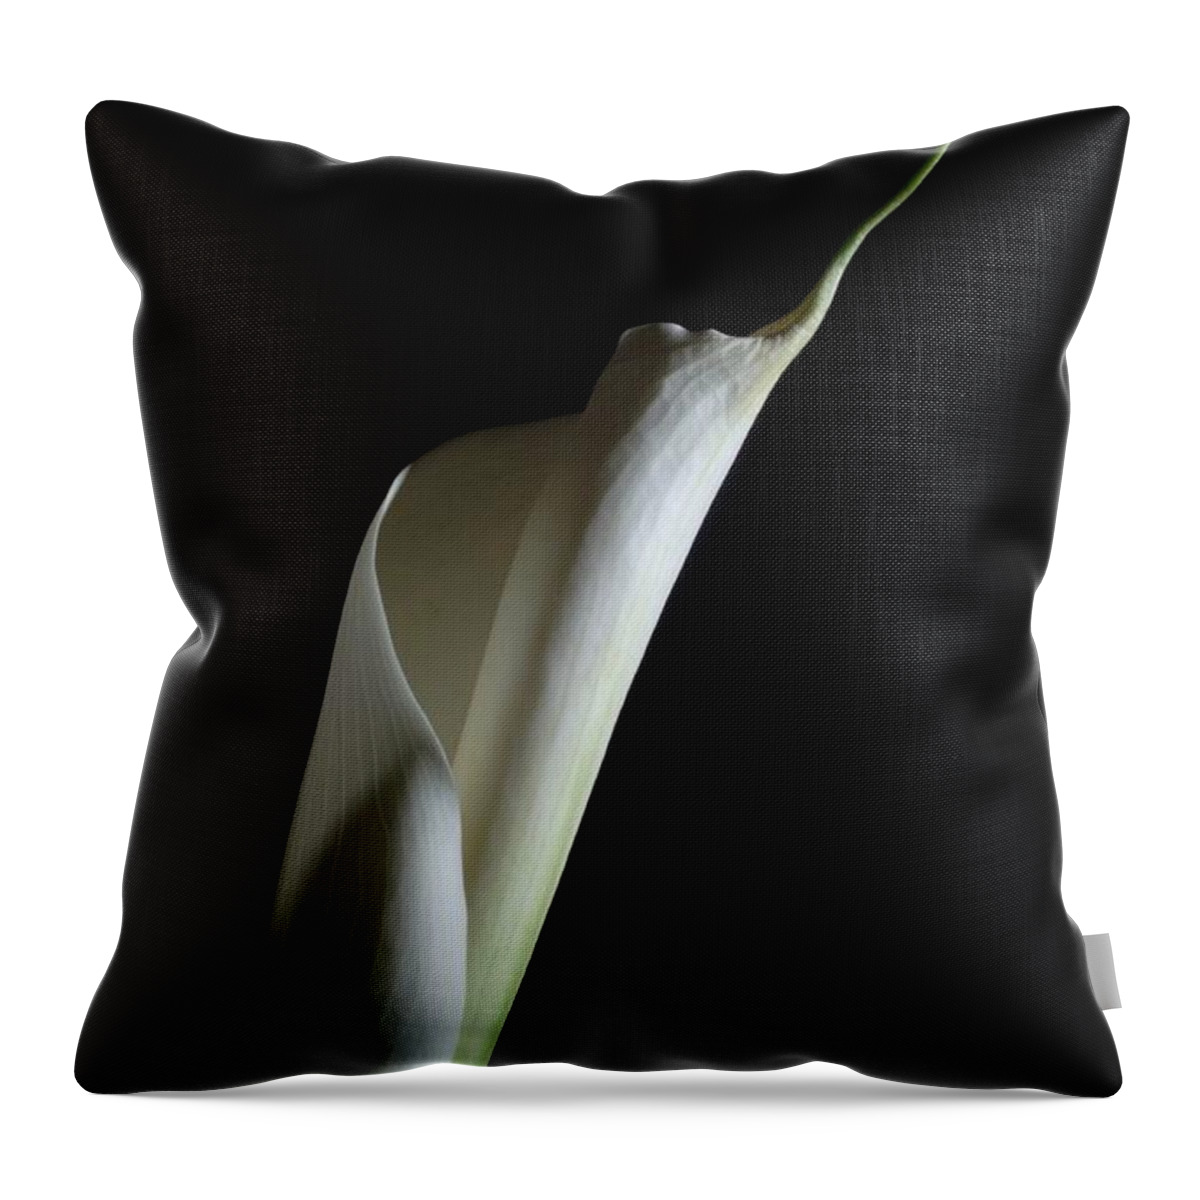 Flower Throw Pillow featuring the photograph Lily 2 by Joe Kozlowski